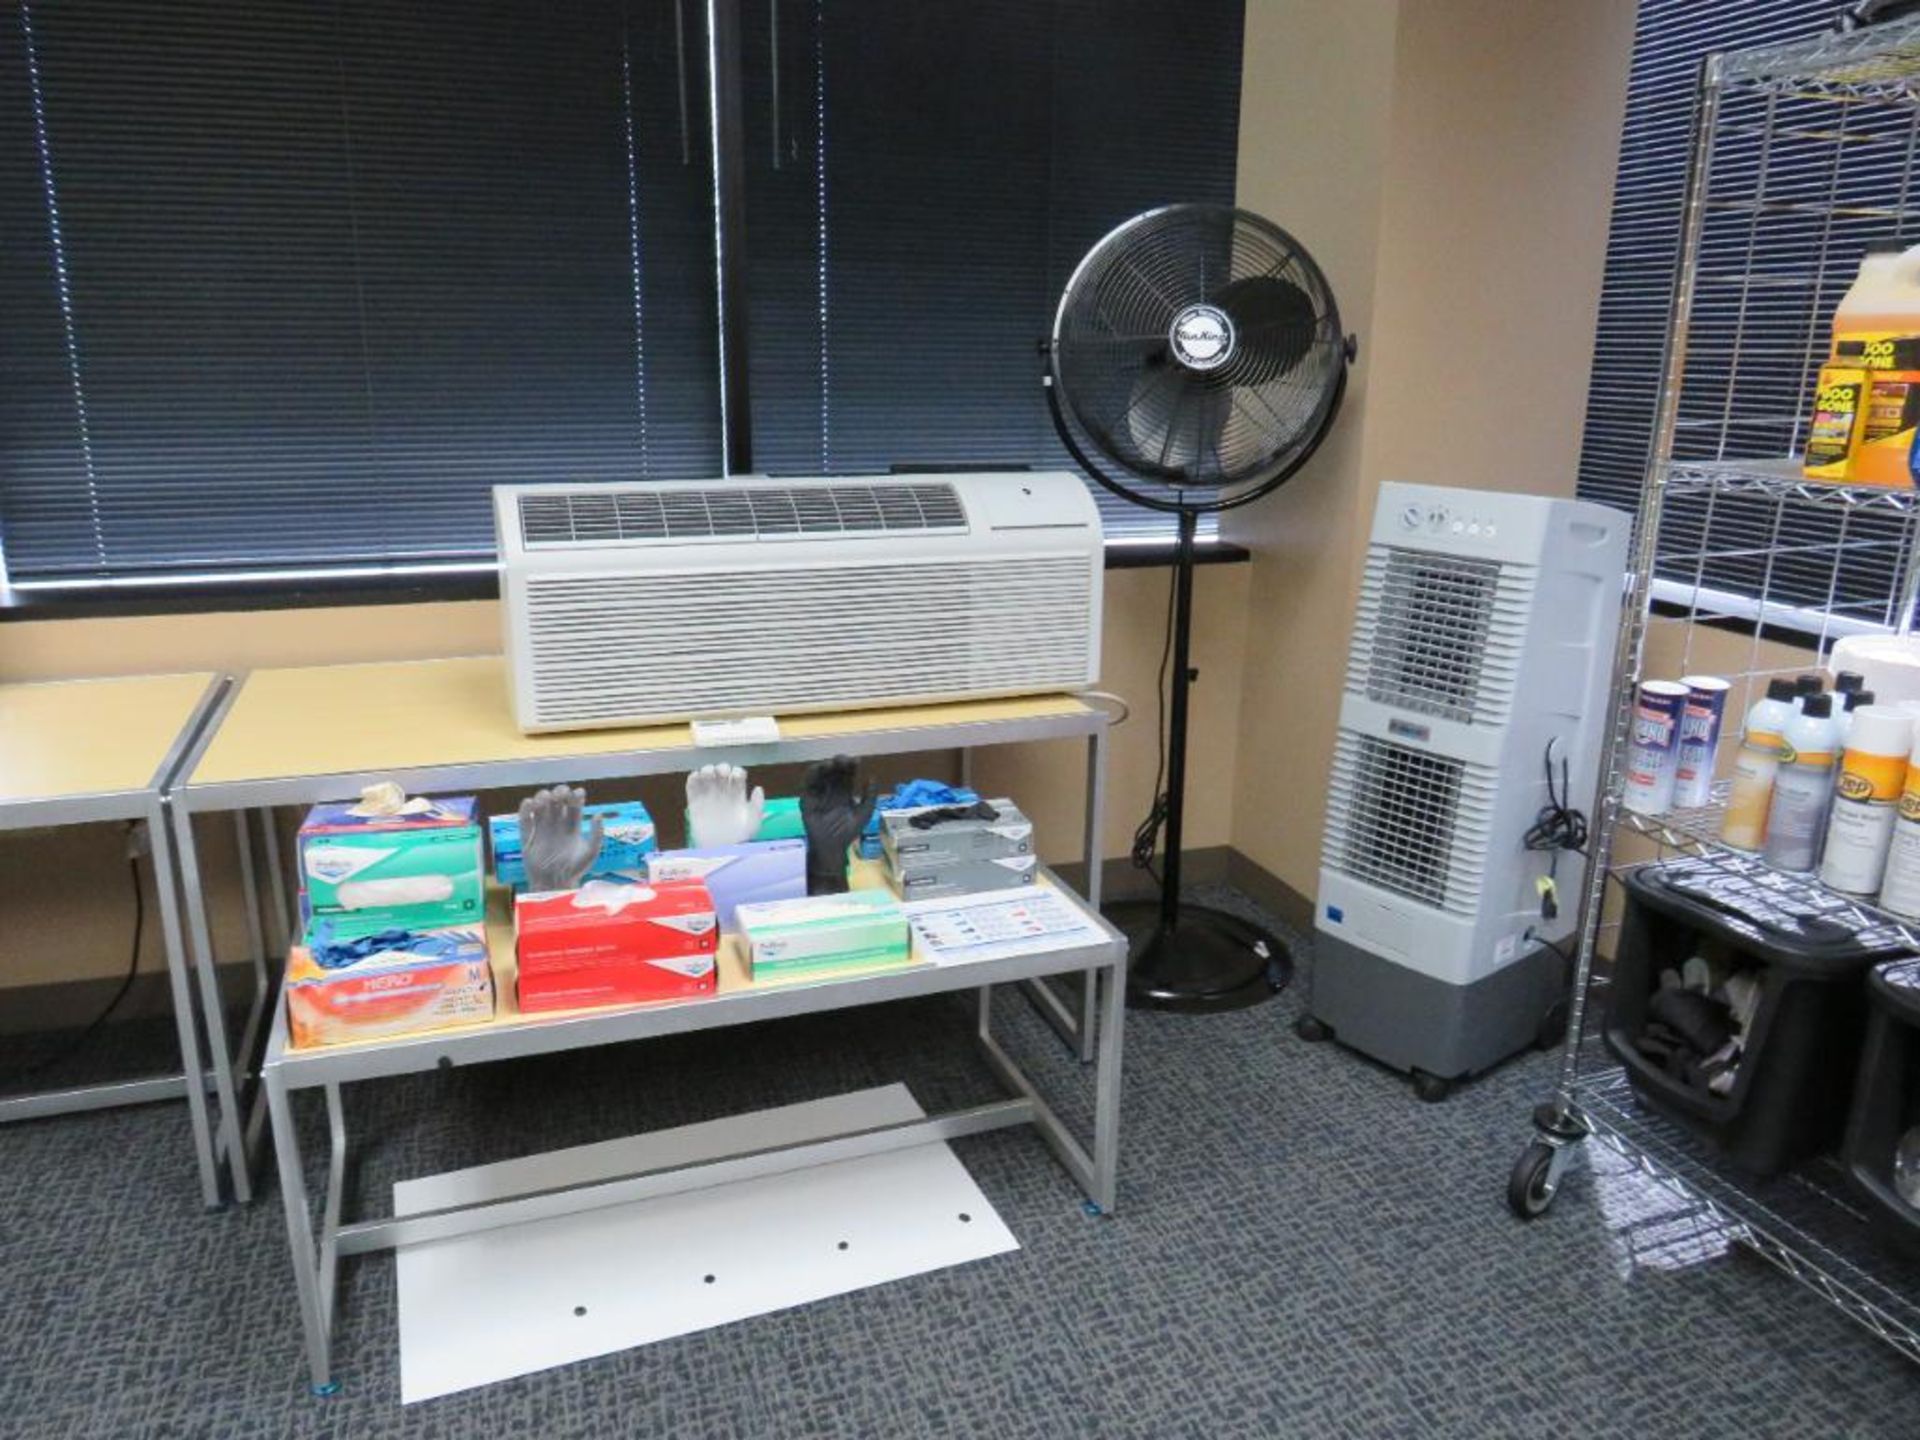 Lot c/o: Sample Room, First Room (4) Shelving Units 31x15x65, All Cleaning Supplies, Asst Mops, Broo - Image 4 of 7